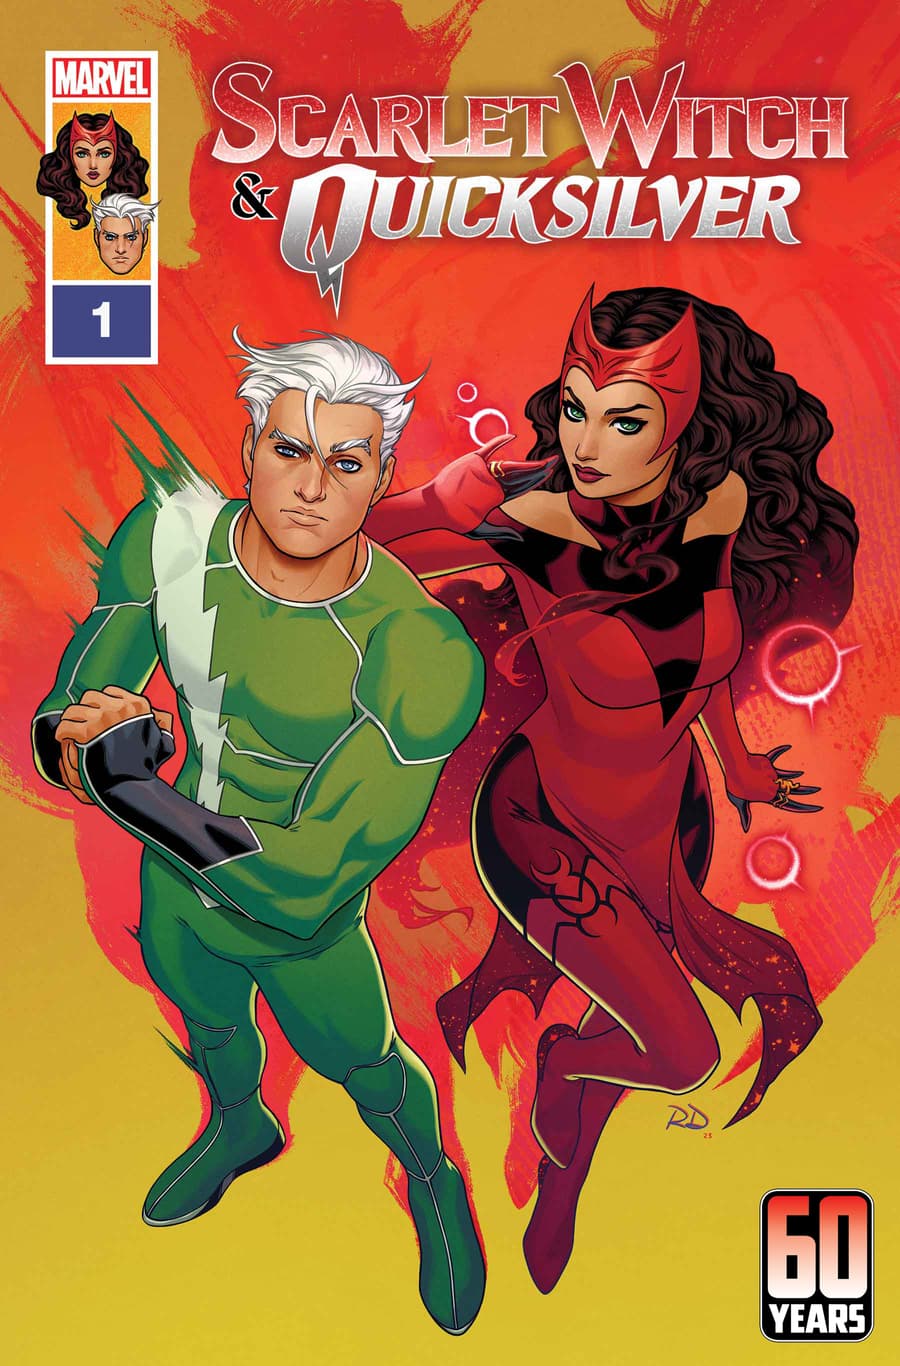 SCARLET WITCH & QUICKSILVER #1 cover by Russell Dauterman